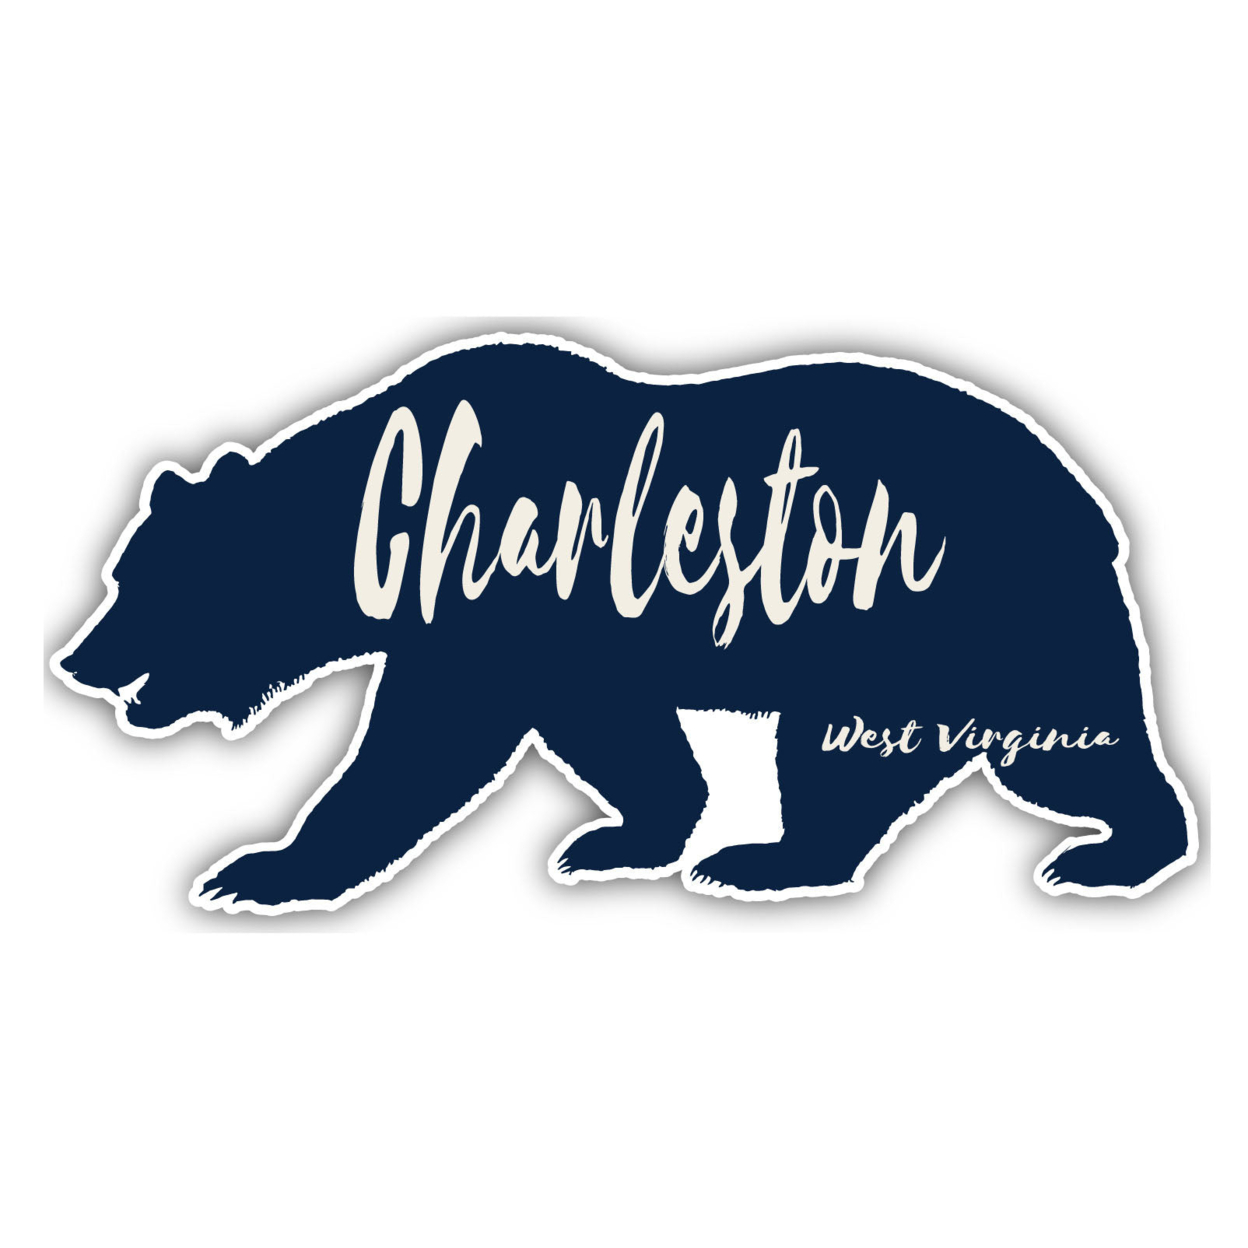 Charleston West Virginia Souvenir Decorative Stickers (Choose Theme And Size) - 4-Pack, 2-Inch, Adventures Awaits